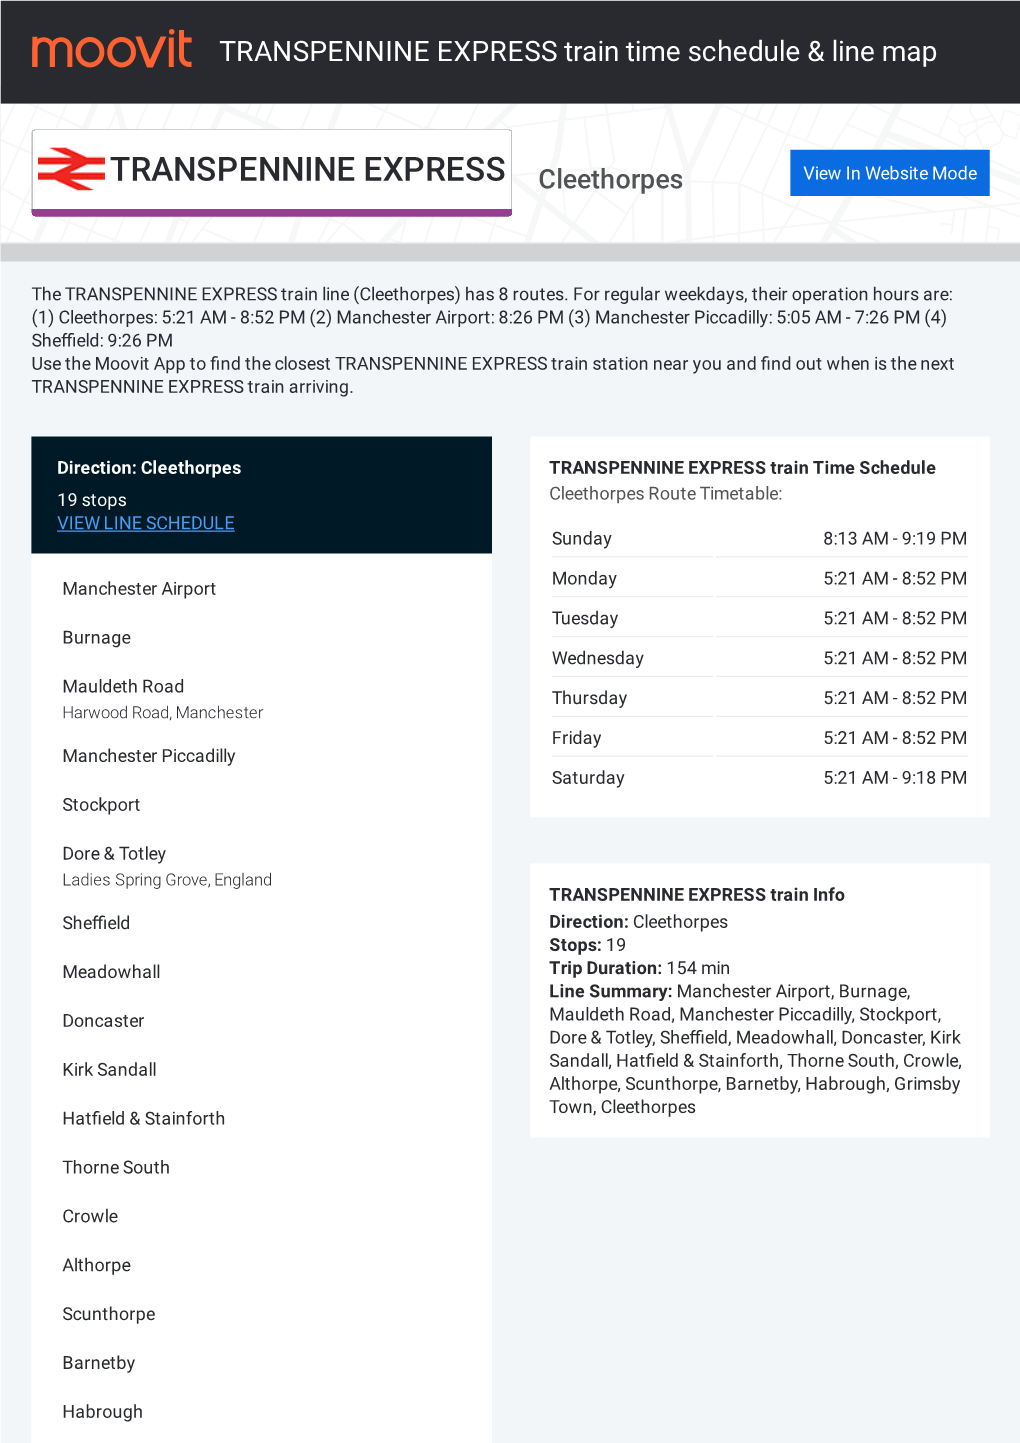 TRANSPENNINE EXPRESS Train Time Schedule & Line Route